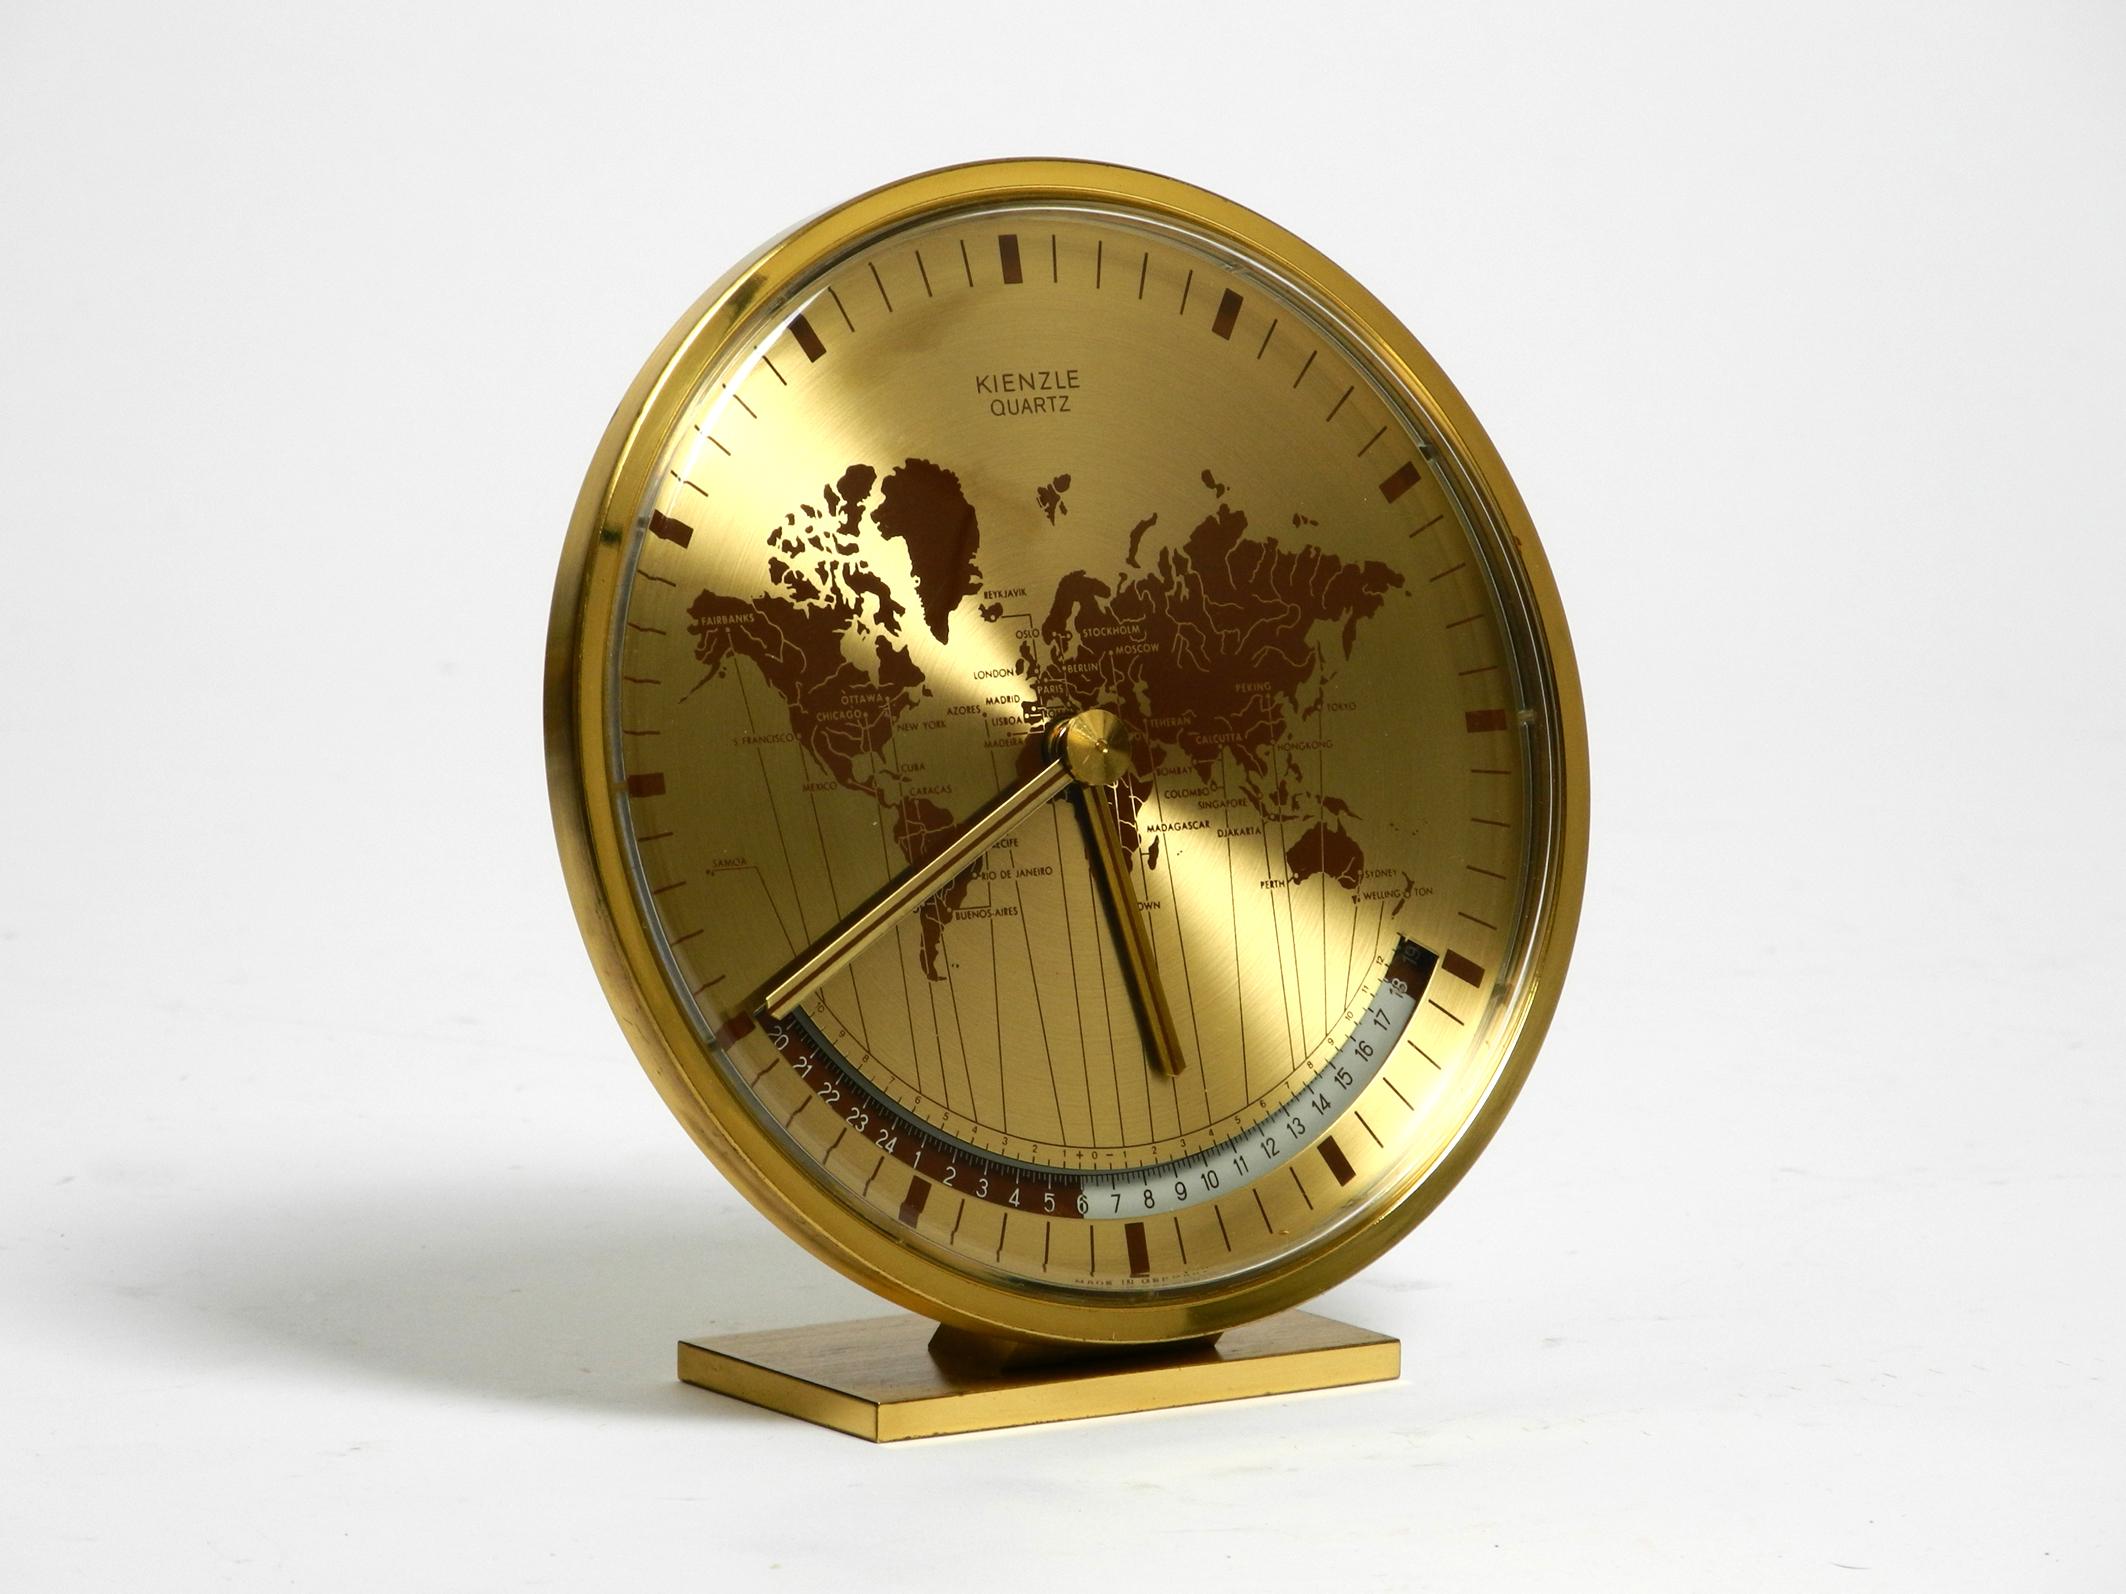 Rare 1980s brass world time table clock by Kienzle.
Goes back to the design of Heinrich Johannes Möller. Made in Germany.
Kienzle is the oldest clock company in Germany.
Housing is made of anodized metal with golden finish, brass base.
Great